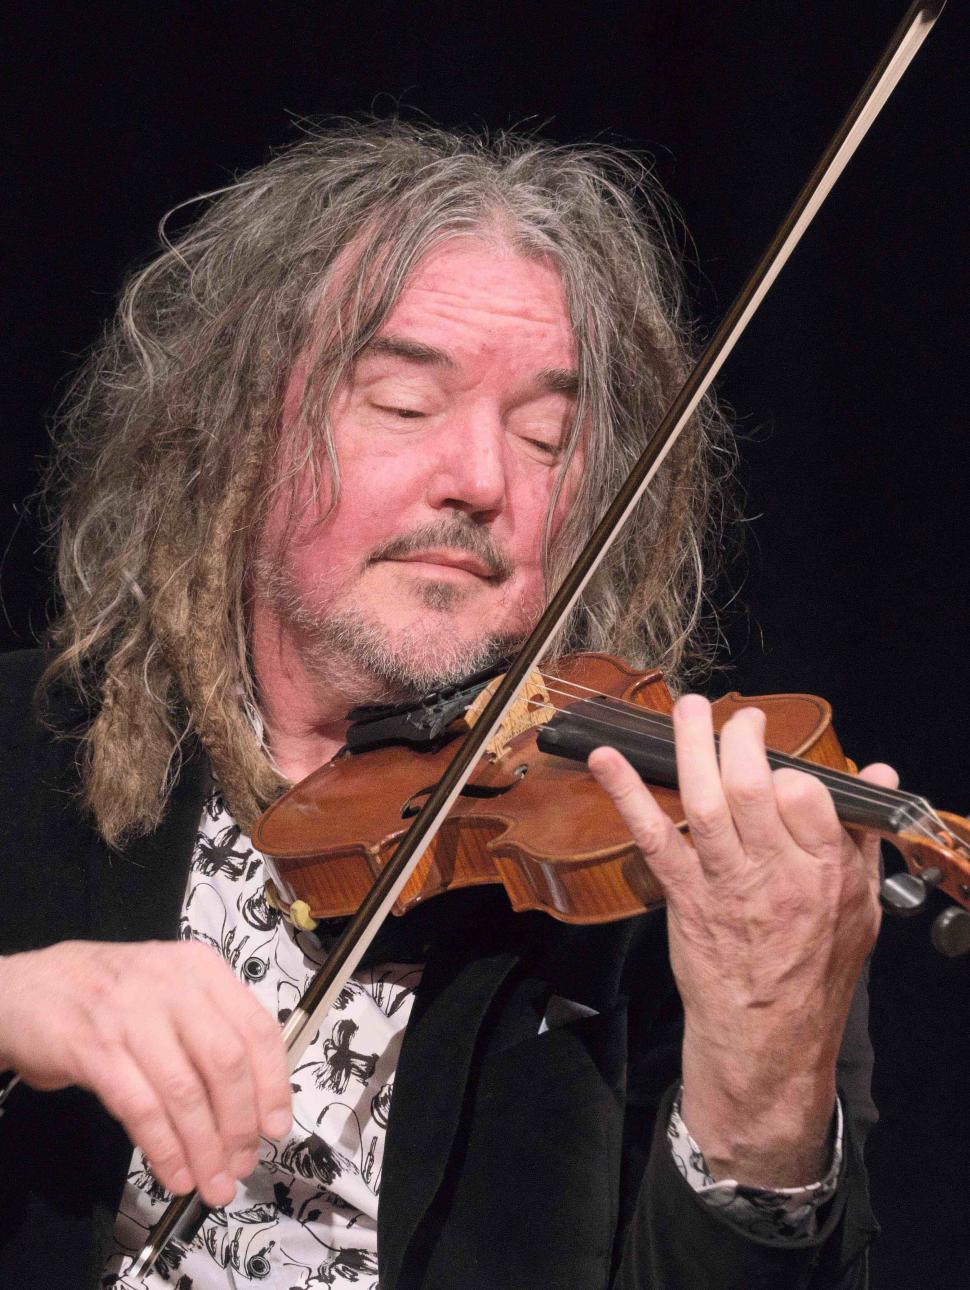 A half portrait image of musician Rupert Guenther, a white man with dark blonde/grey hair. He is holding a violin and is mid bow. He is wearing a black velvet jacket and a white and black patterned shirt.  